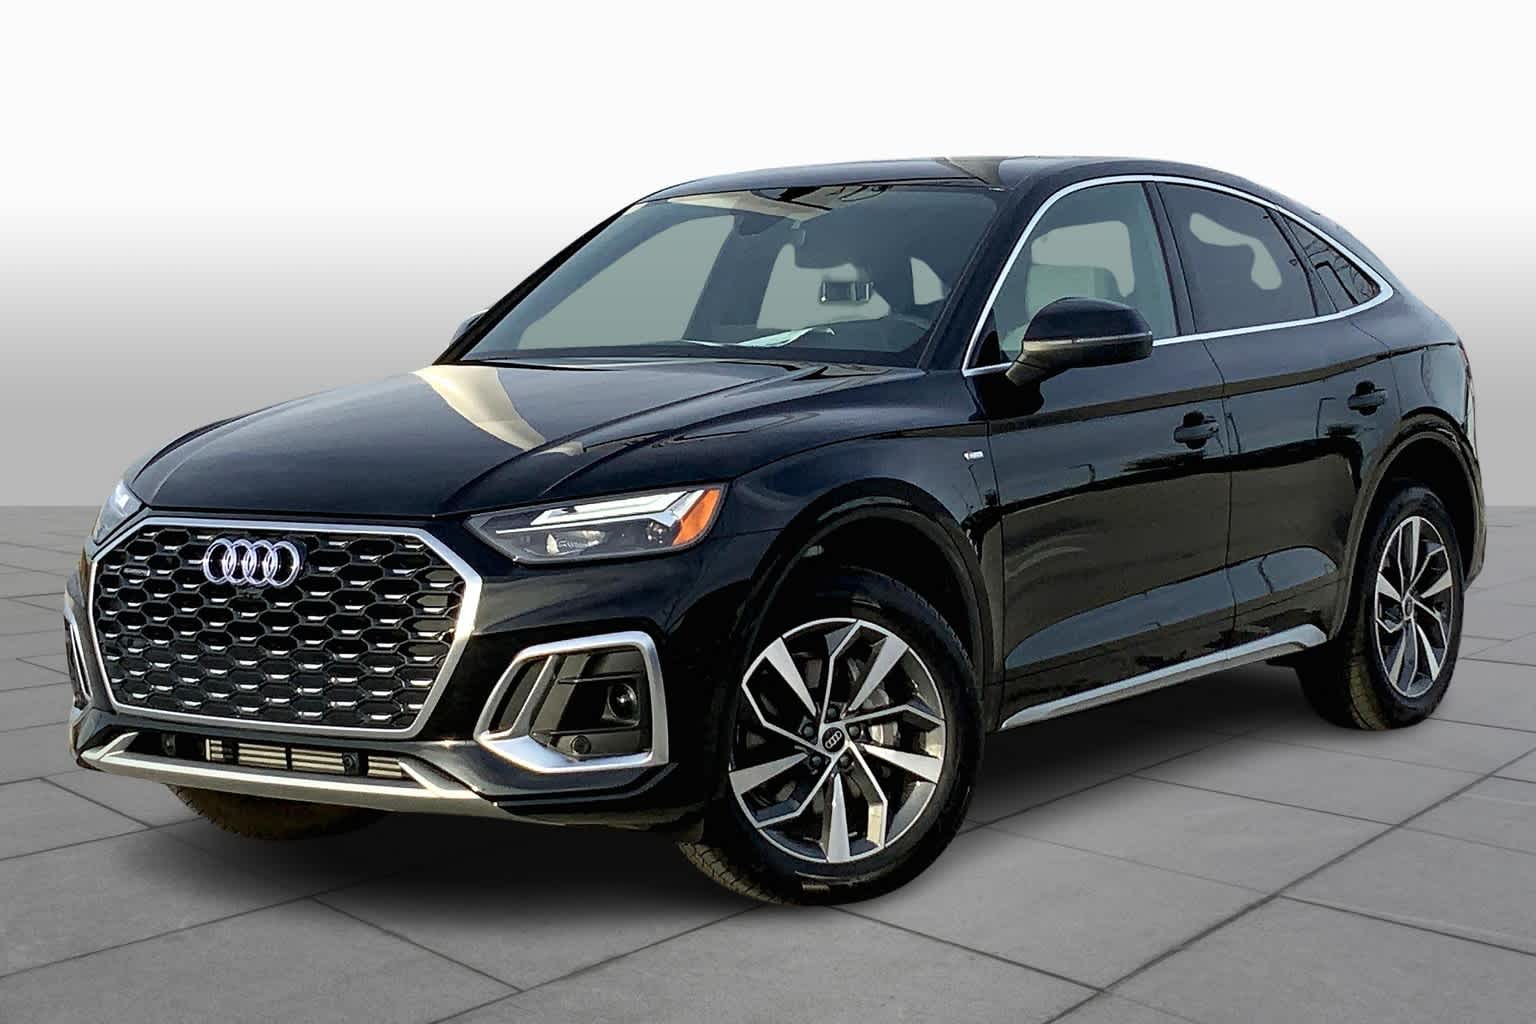 2021 Audi SQ5 Sportback Review: Not Much Soul In This 'S